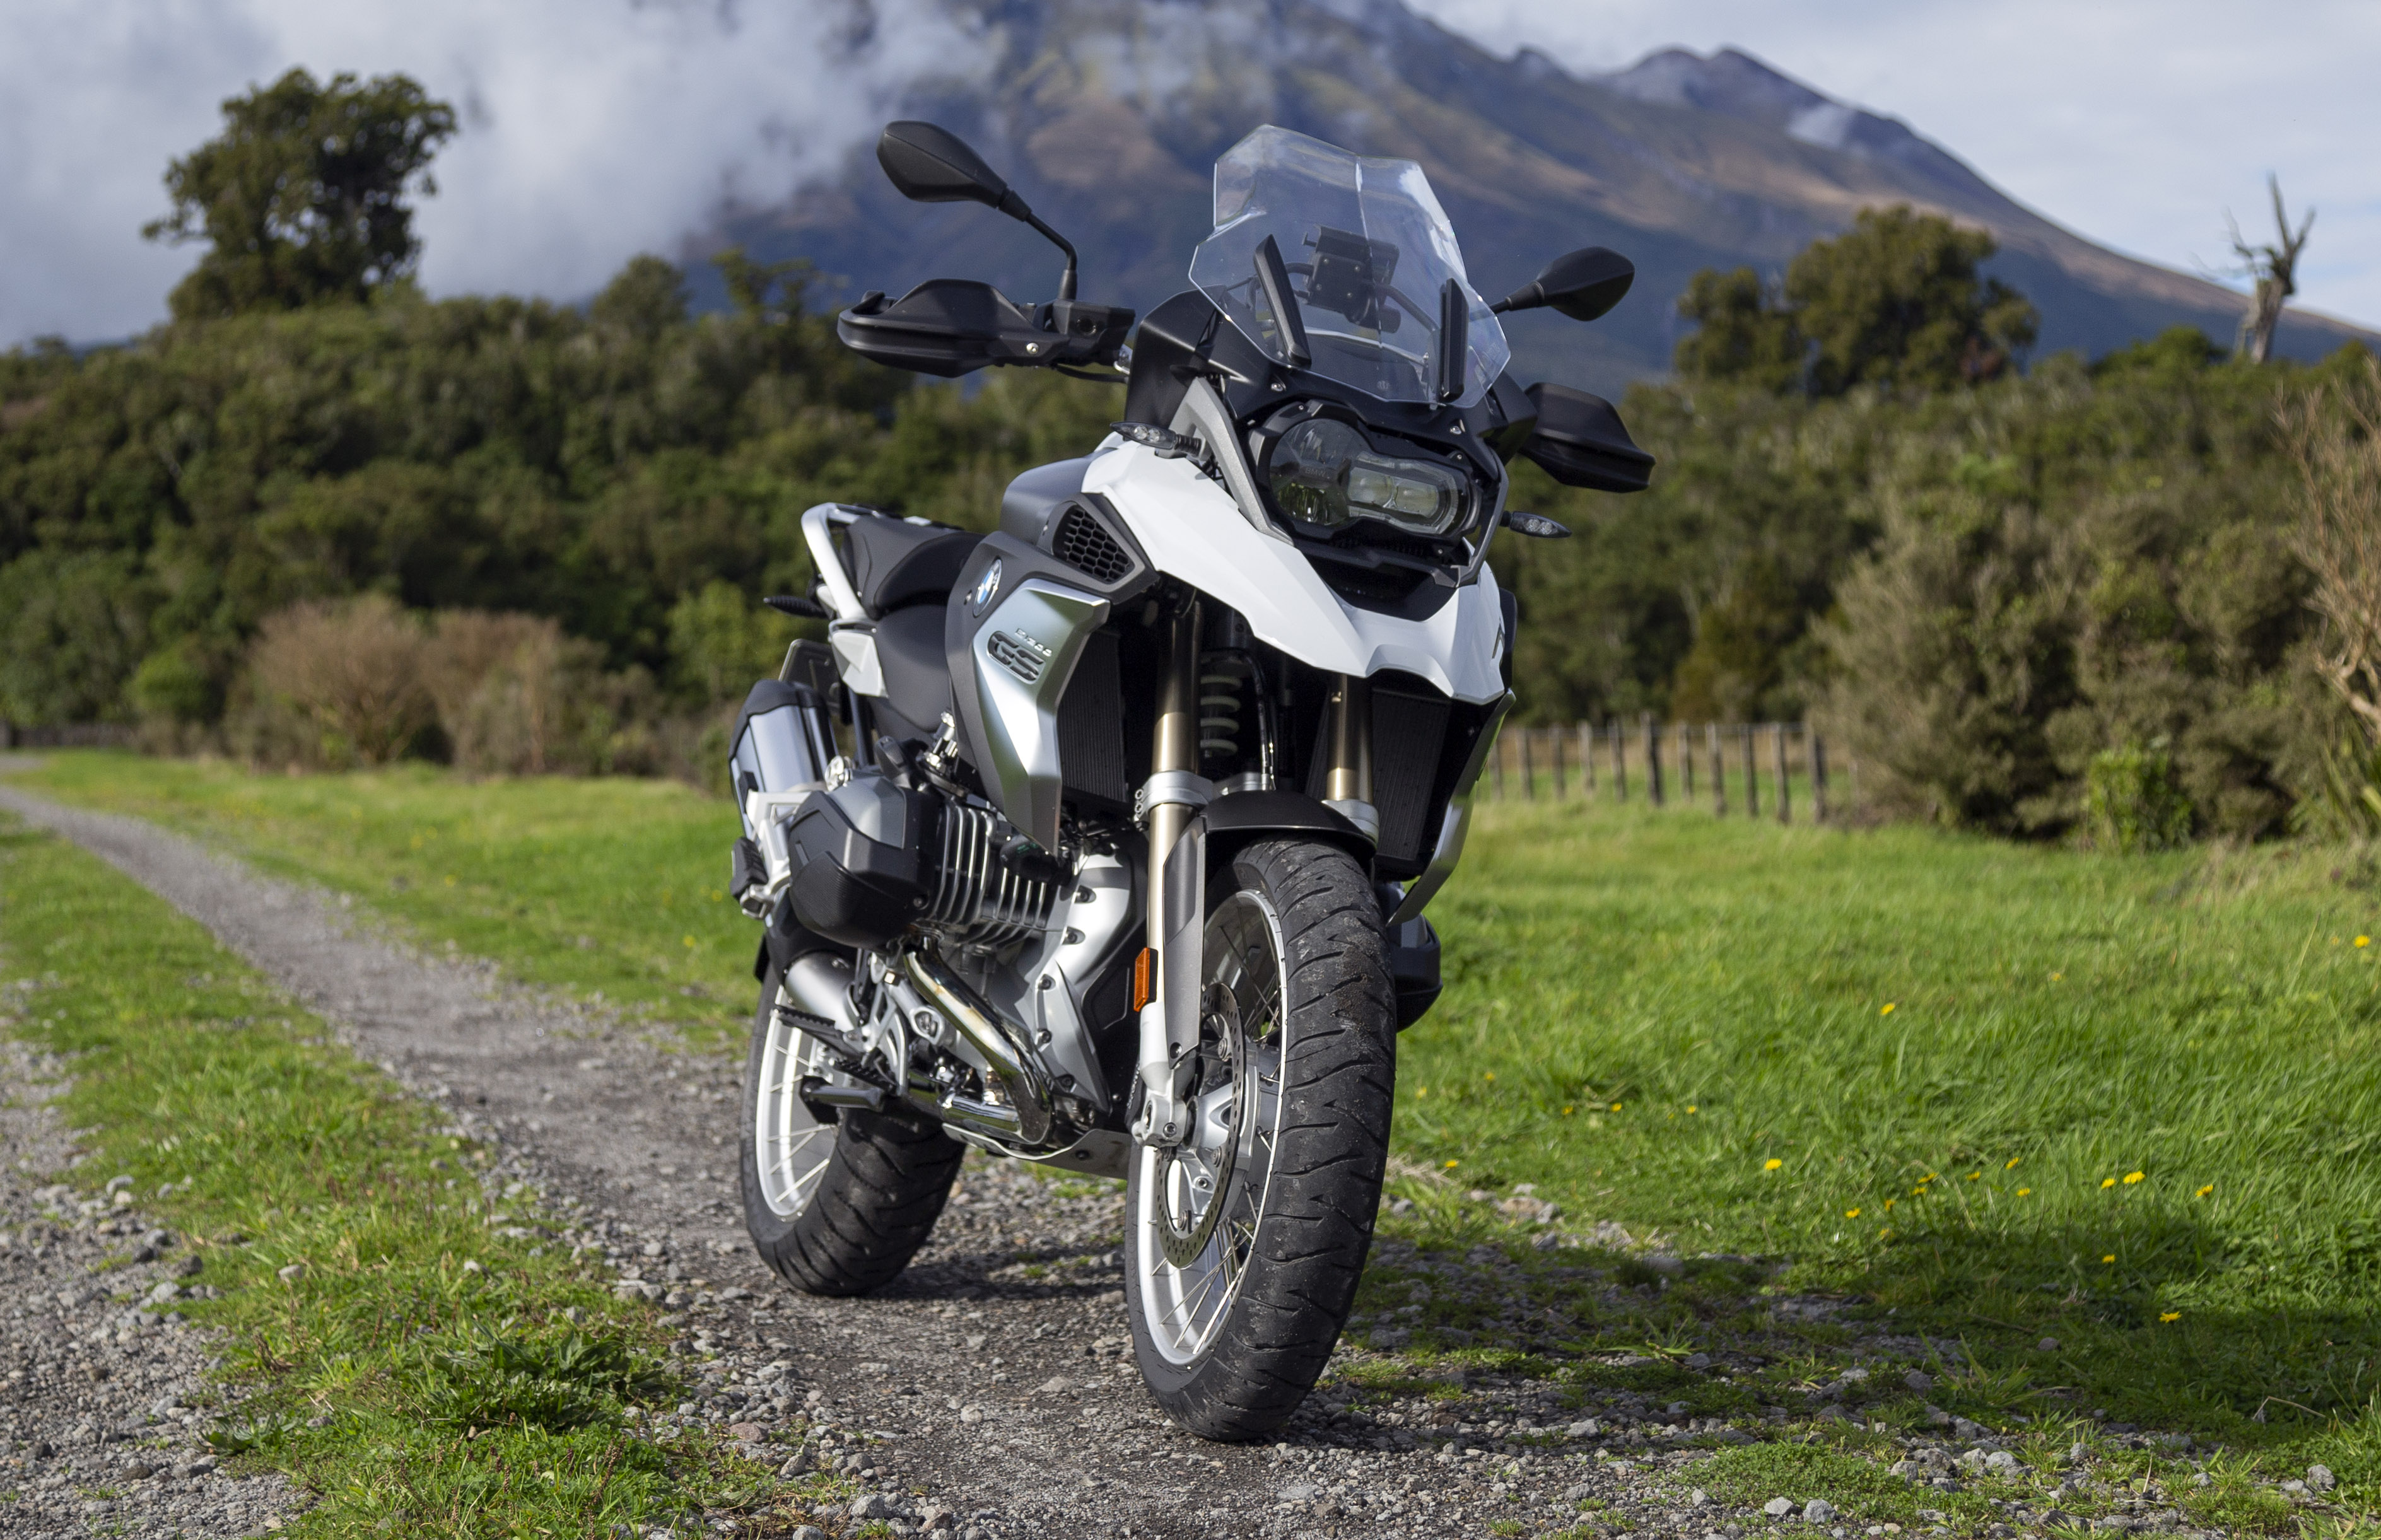 Mobile wallpaper: Bmw R 1200 Gs, Bike, Front View, Motorcycles, Motorcycle,  Bmw, 155308 download the picture for free.